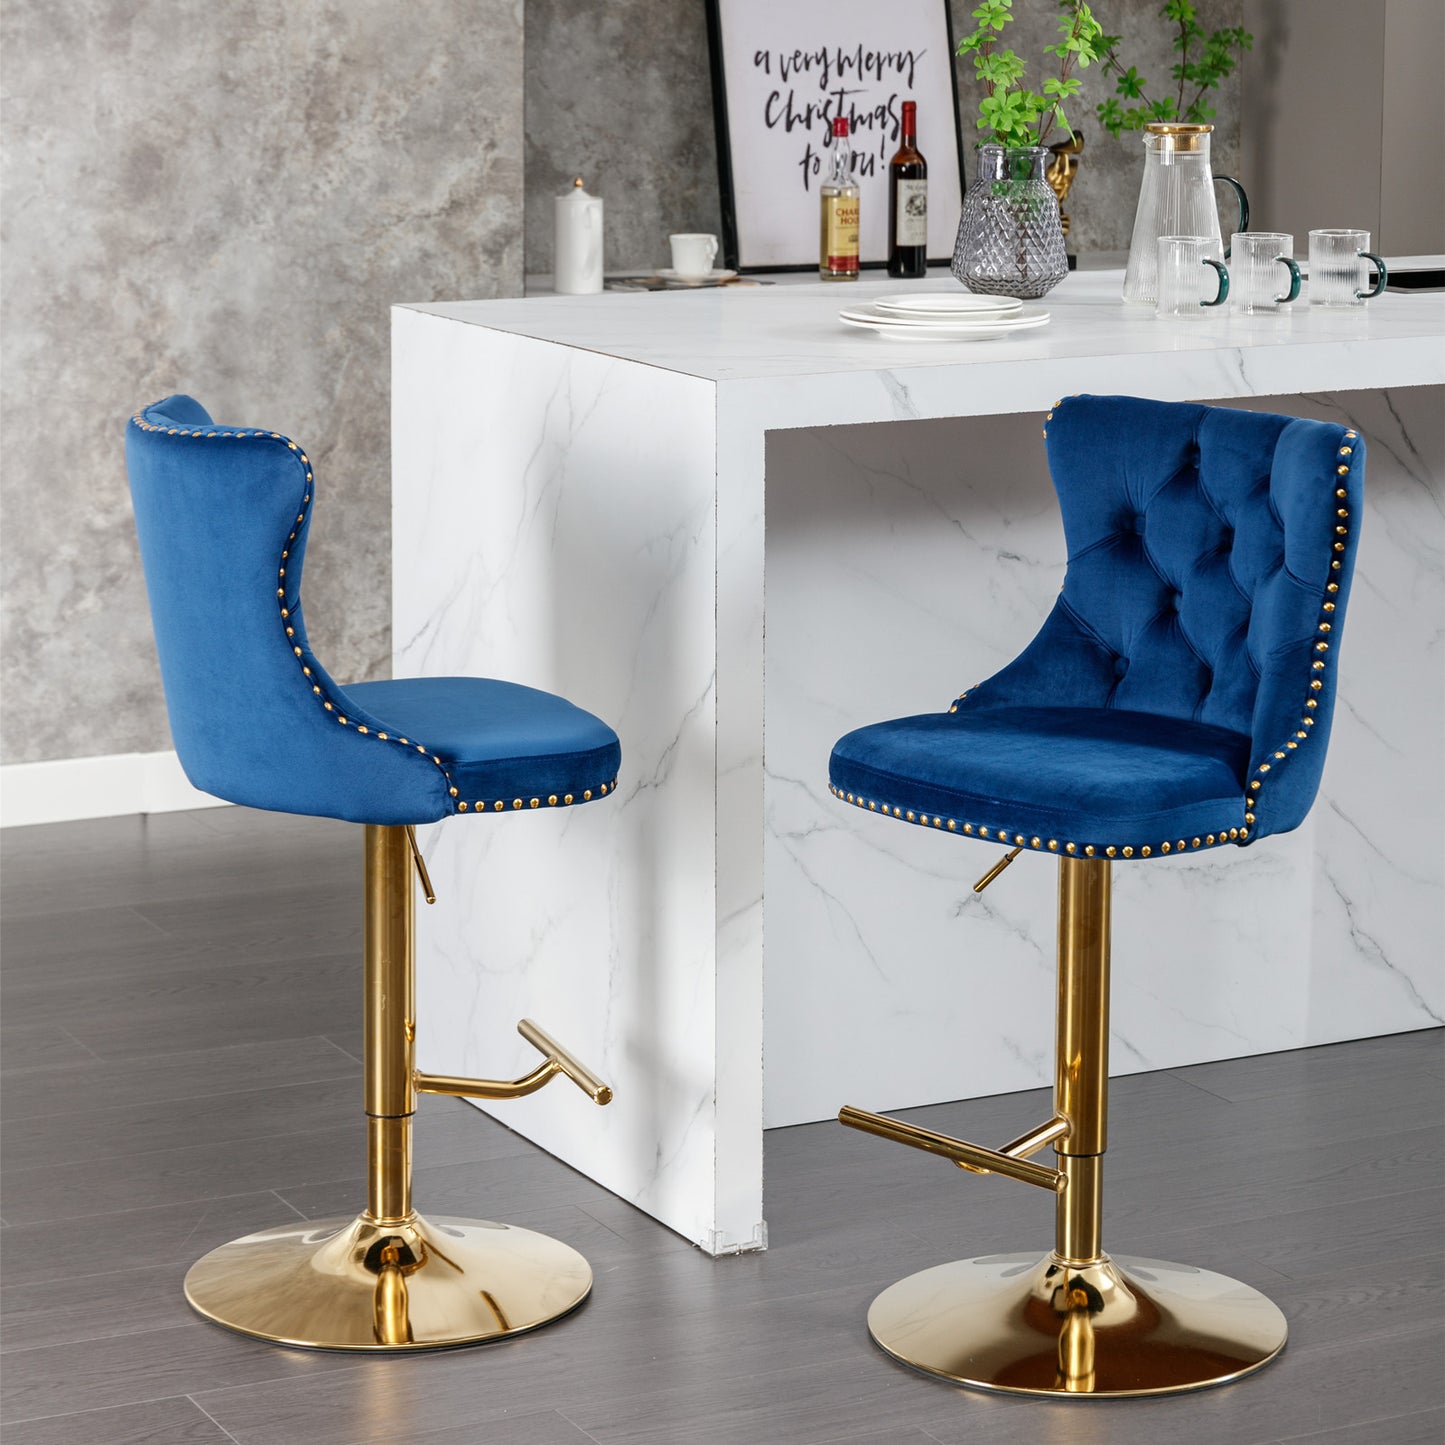 Golden Swivel Velvet Barstools Adjusatble Seat Height from 25-33 Inch, Modern Upholstered Bar Stools with Backs Comfortable Tufted for Home Pub and Kitchen Island, Blue, Set of 2